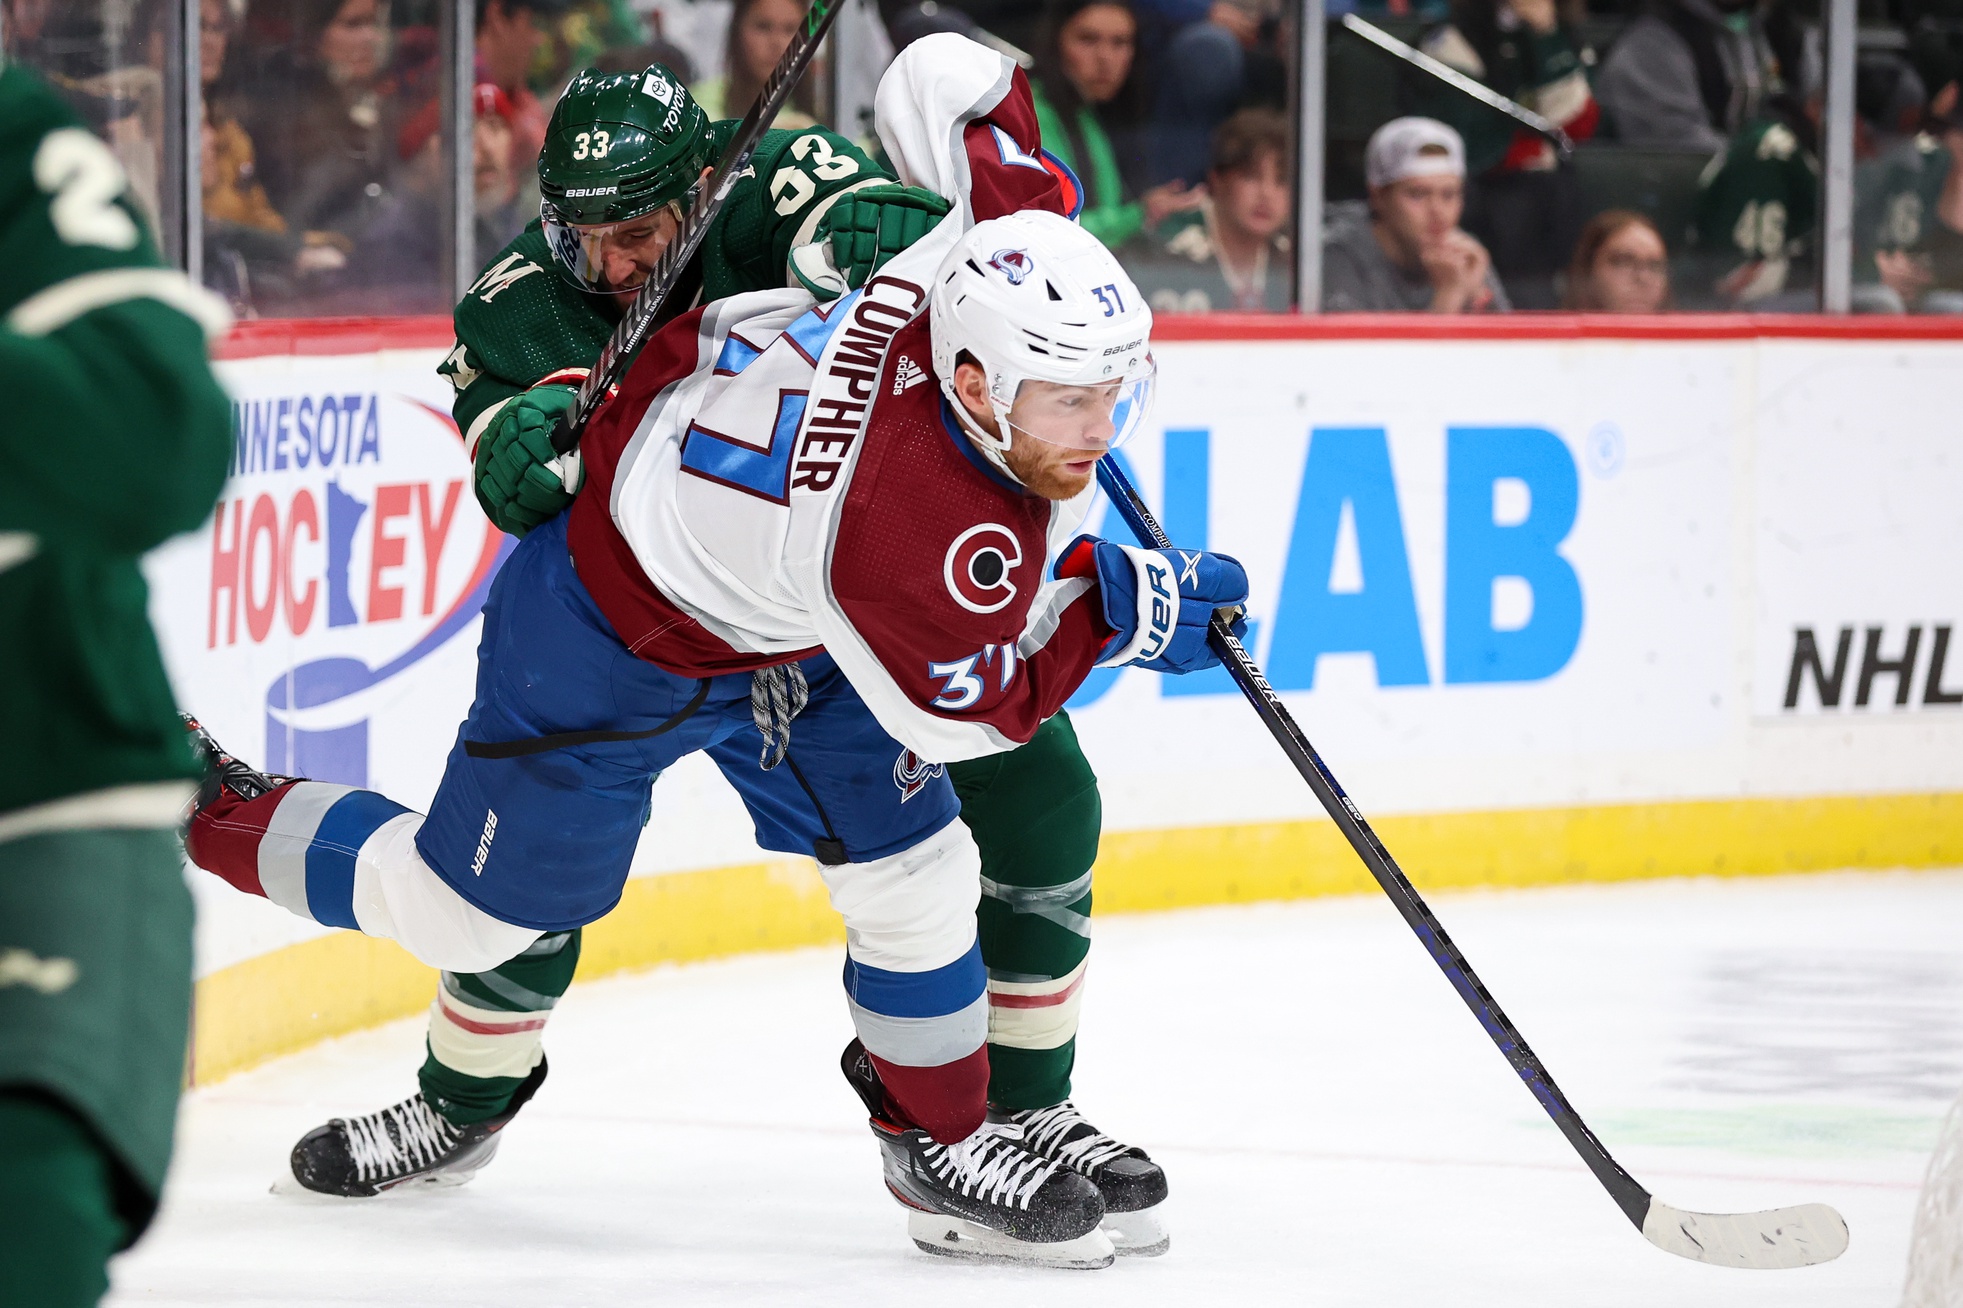 With a 4-year deal, Stars are betting heavily on Ryan Suter's